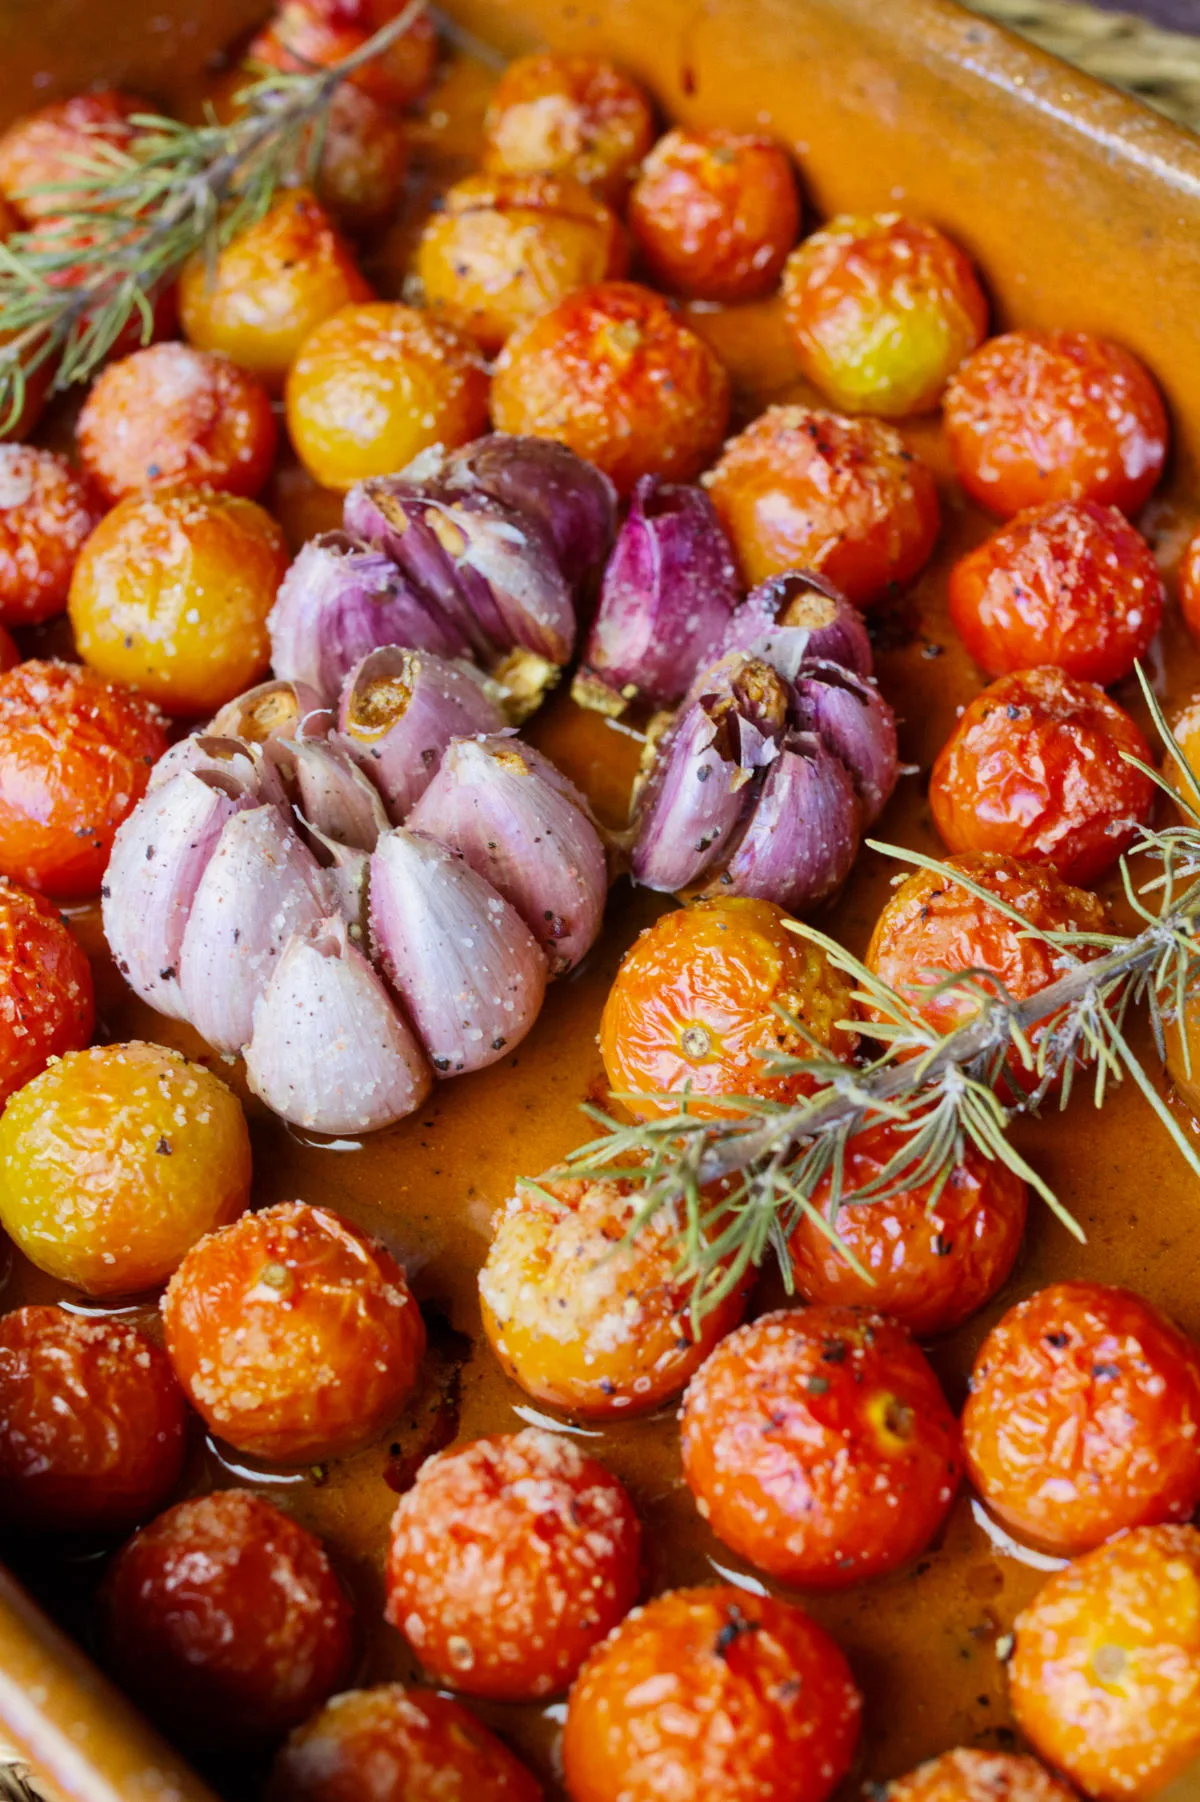 A dish of oven baked cherry tomato confit with garlic and a sprig of rosemary.